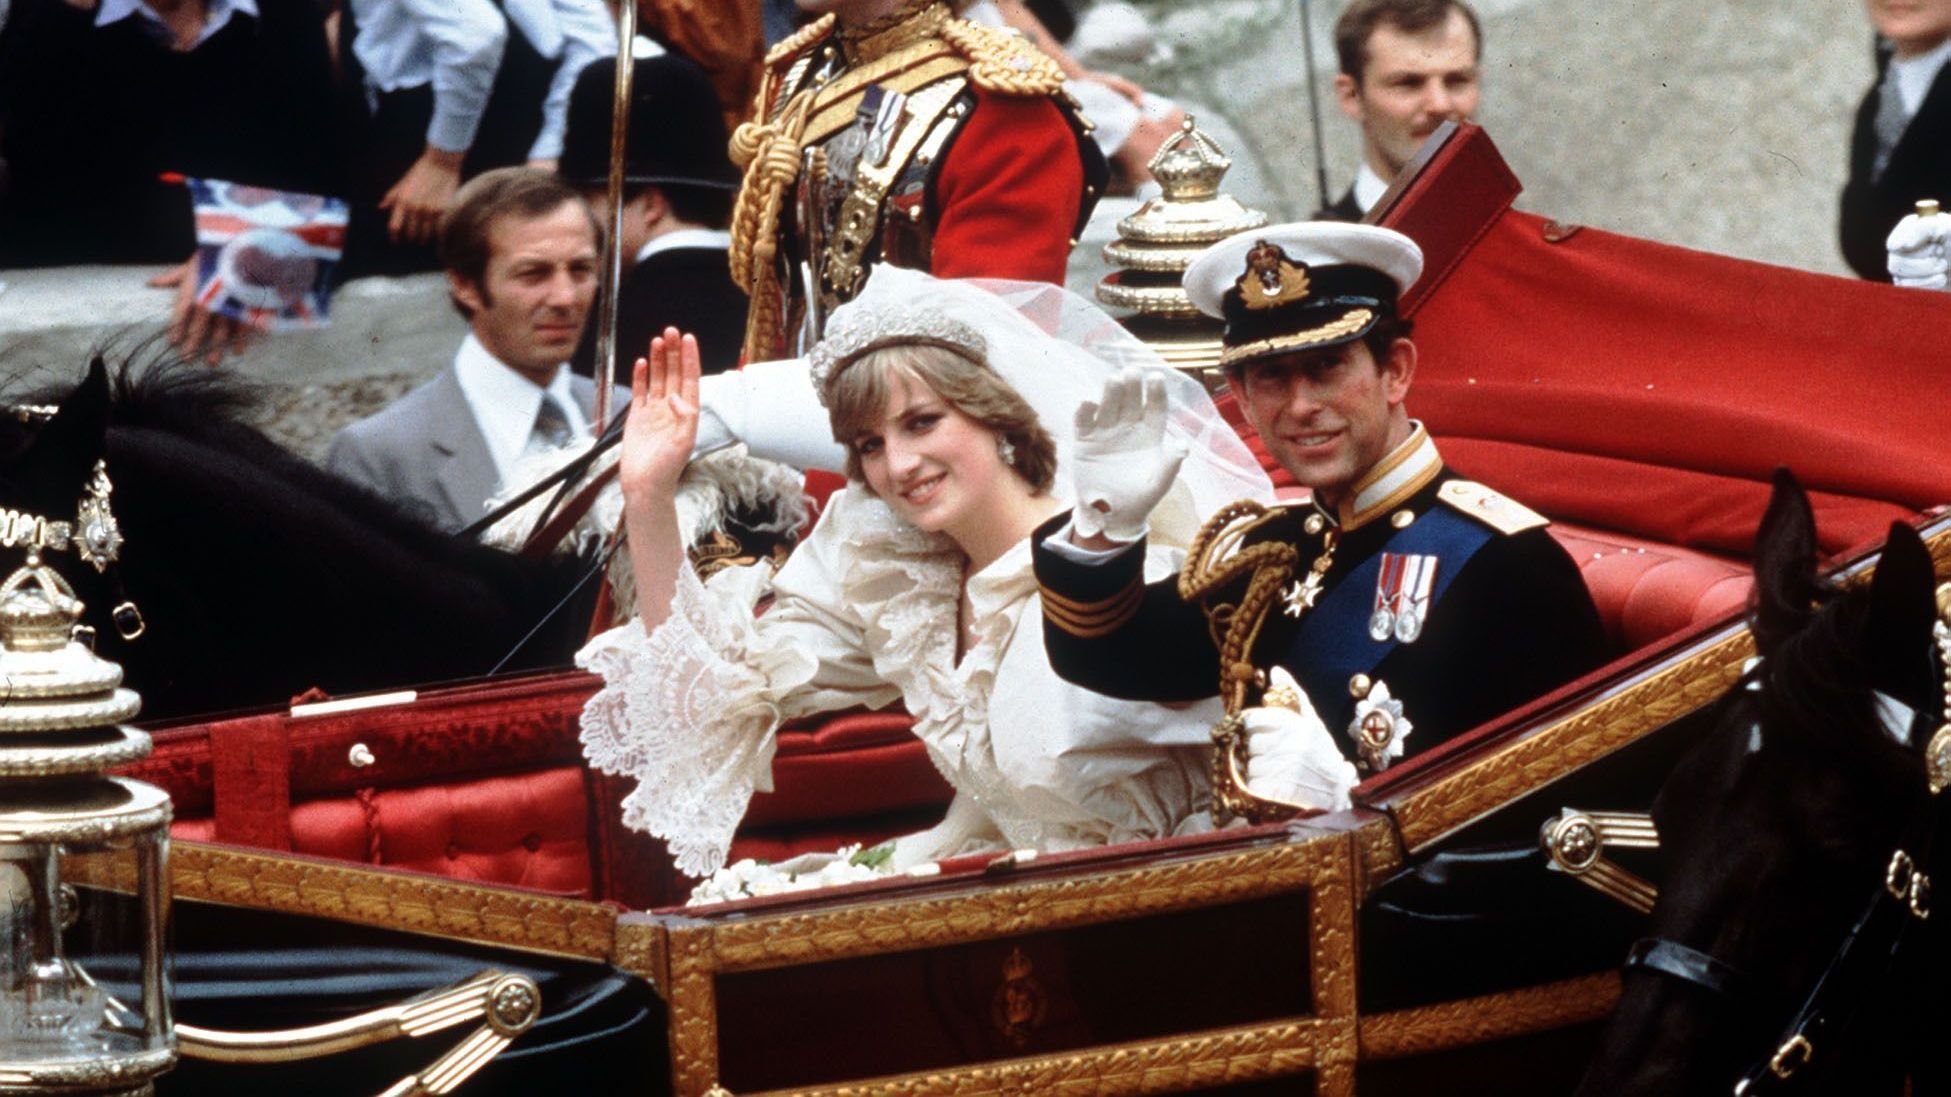 The Prince and Princess of Wales during their carriage procession to Buckingham Palace after their wedding at St.Paul's Cathedral,